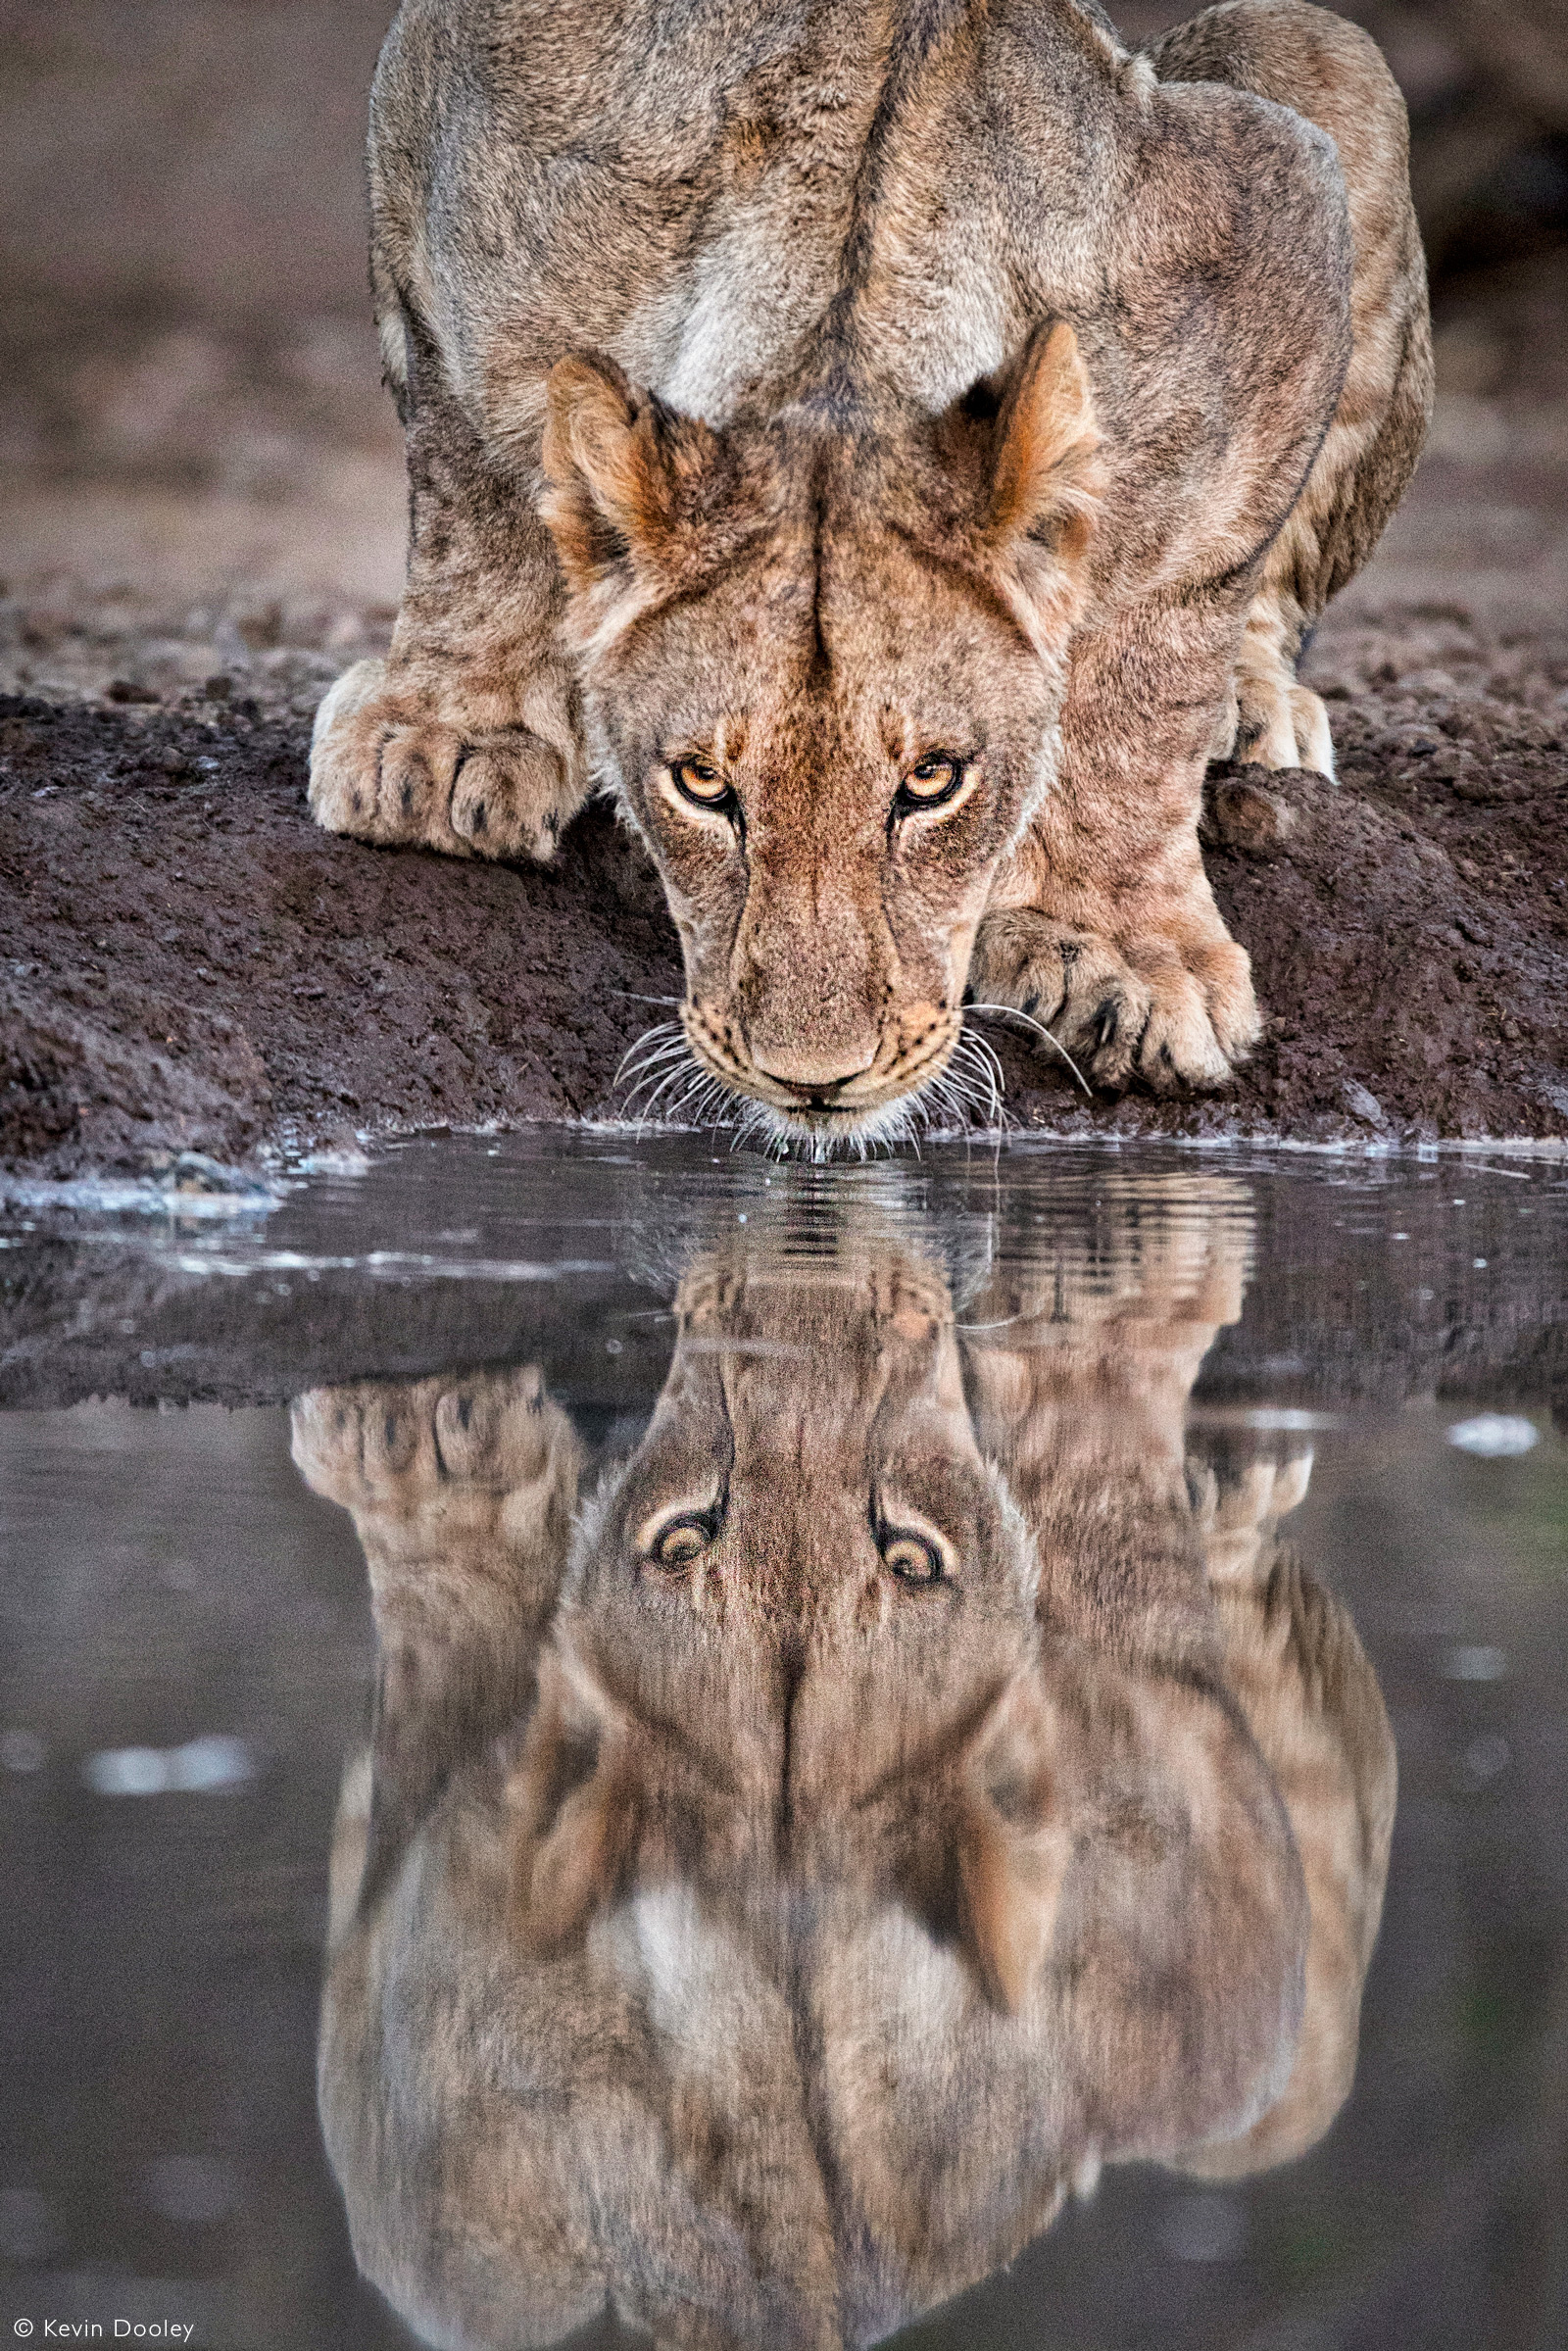 A lioness gets in a quick evening drink. Mashatu Game Reserve, Botswana © Kevin Dooley